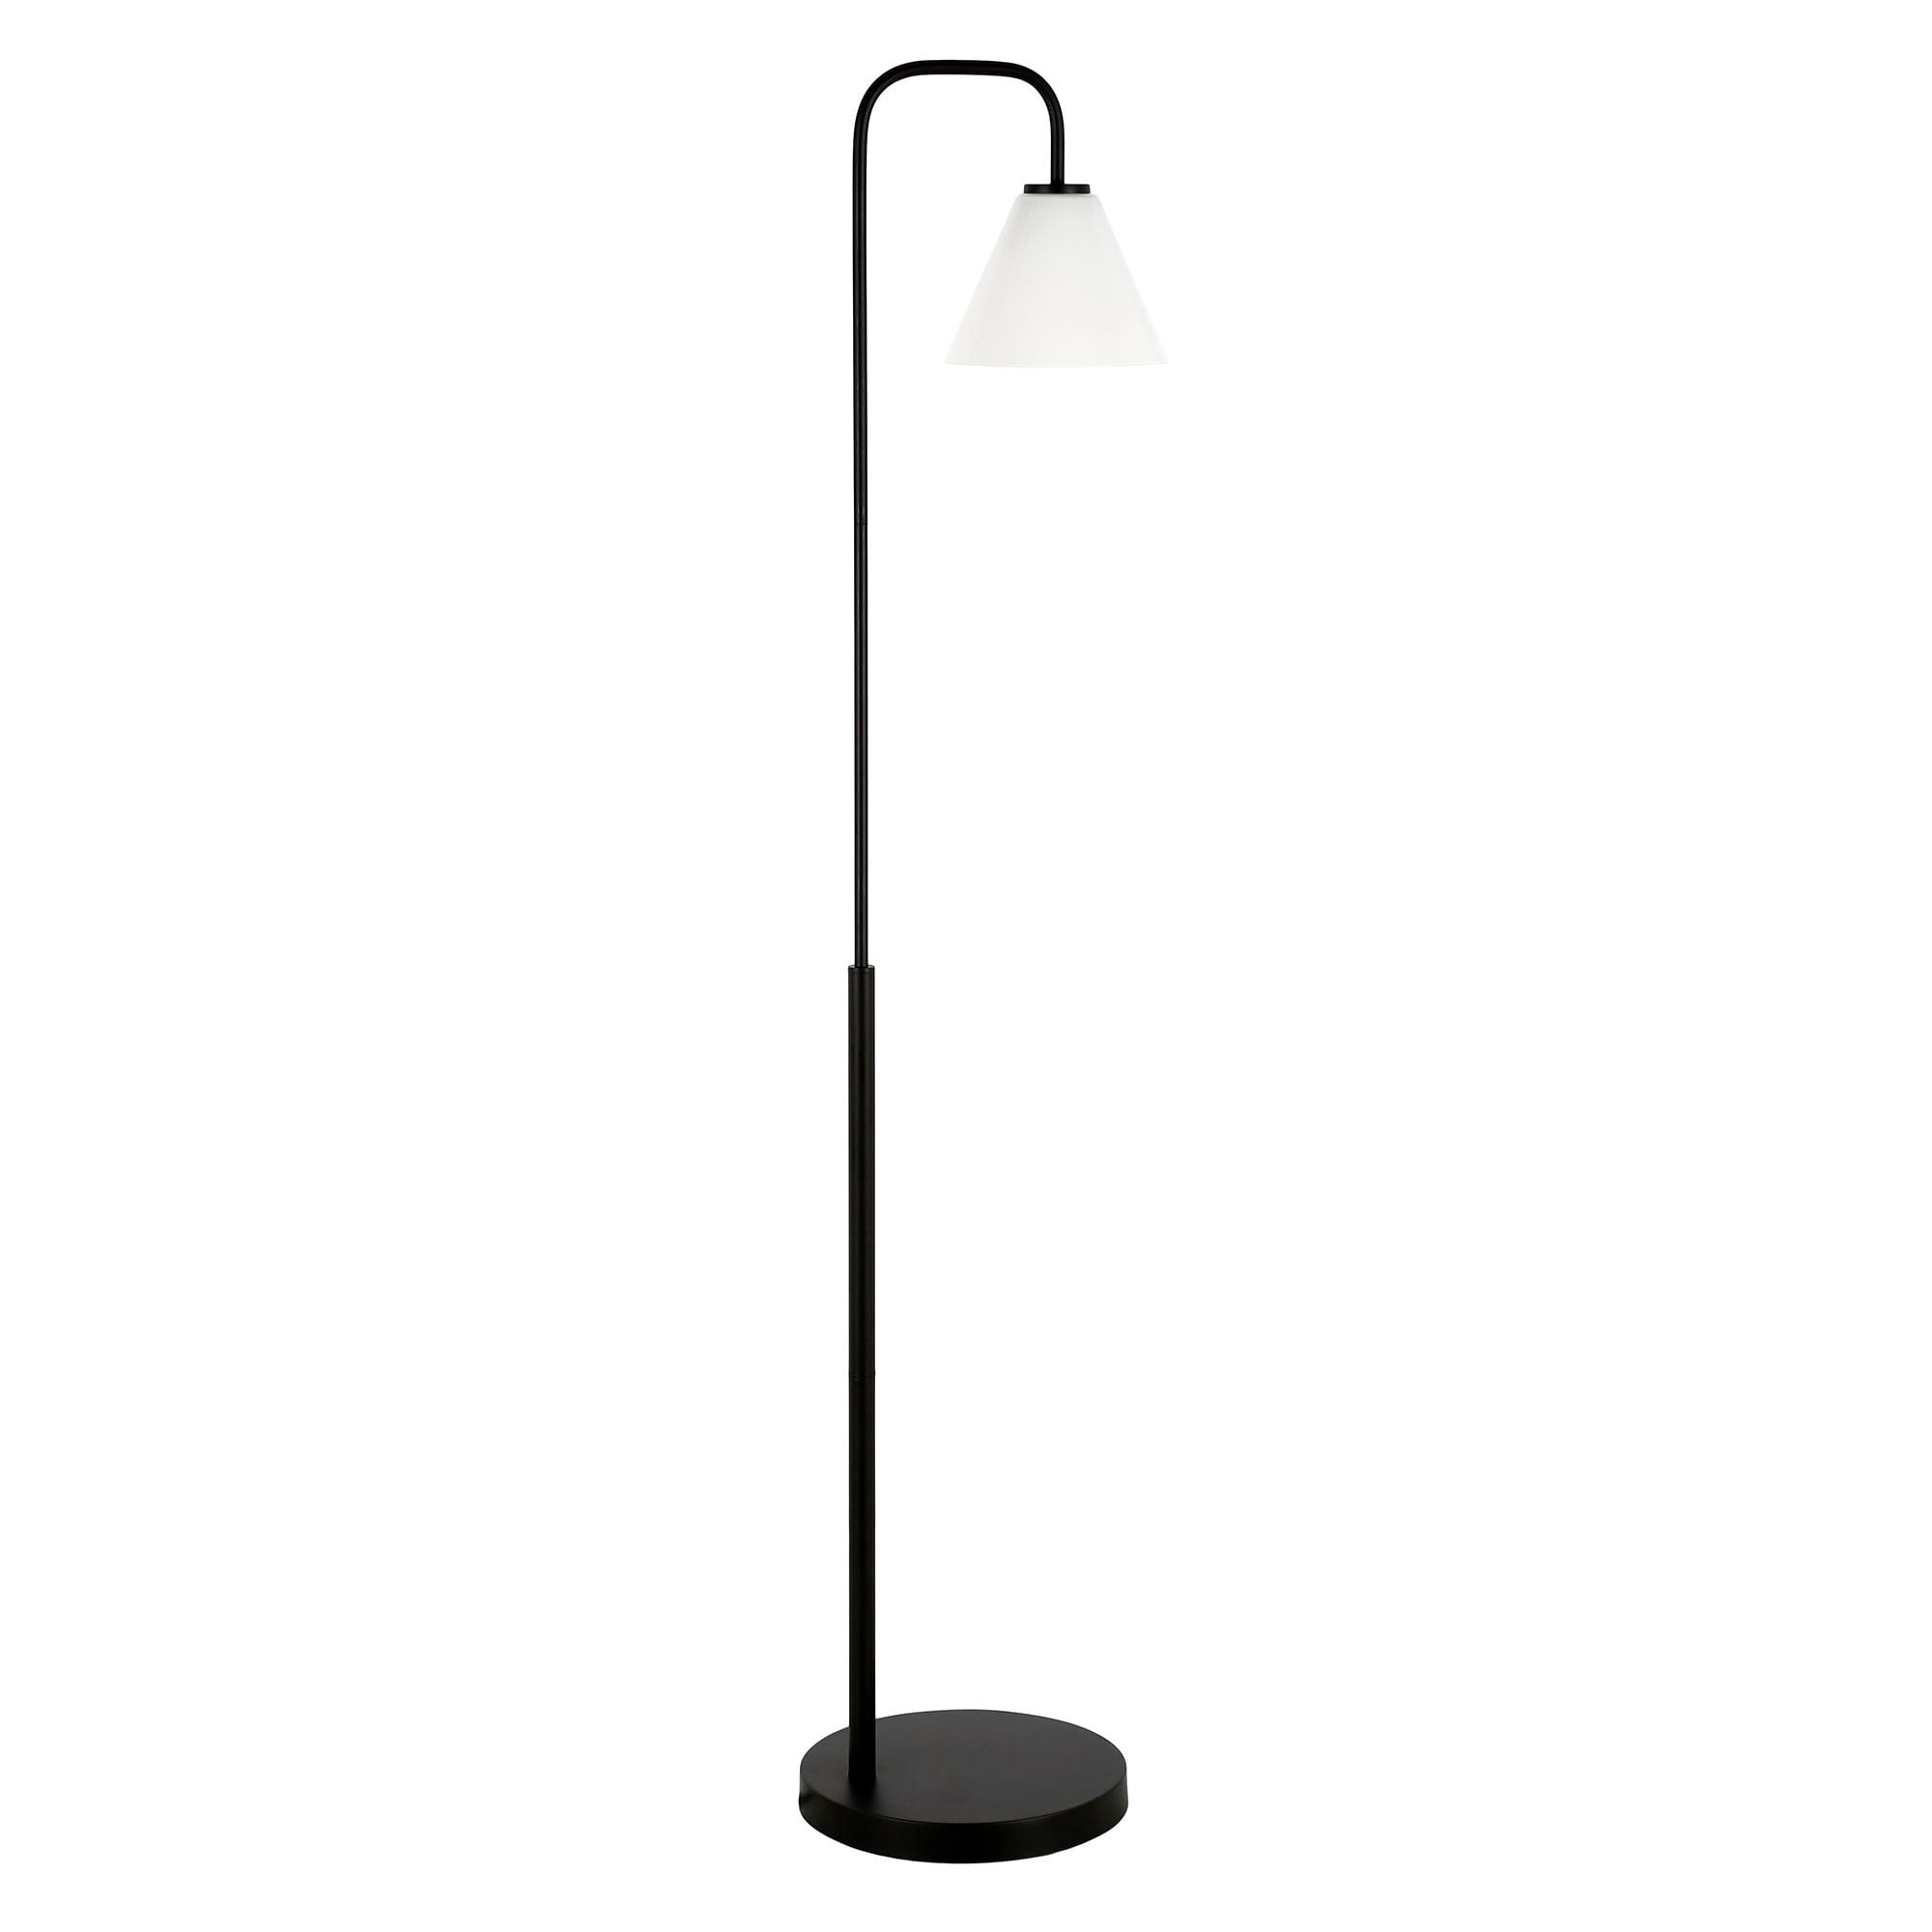 Henderson Voice-Controlled Blackened Bronze Arc Floor Lamp with White Milk Glass Shade